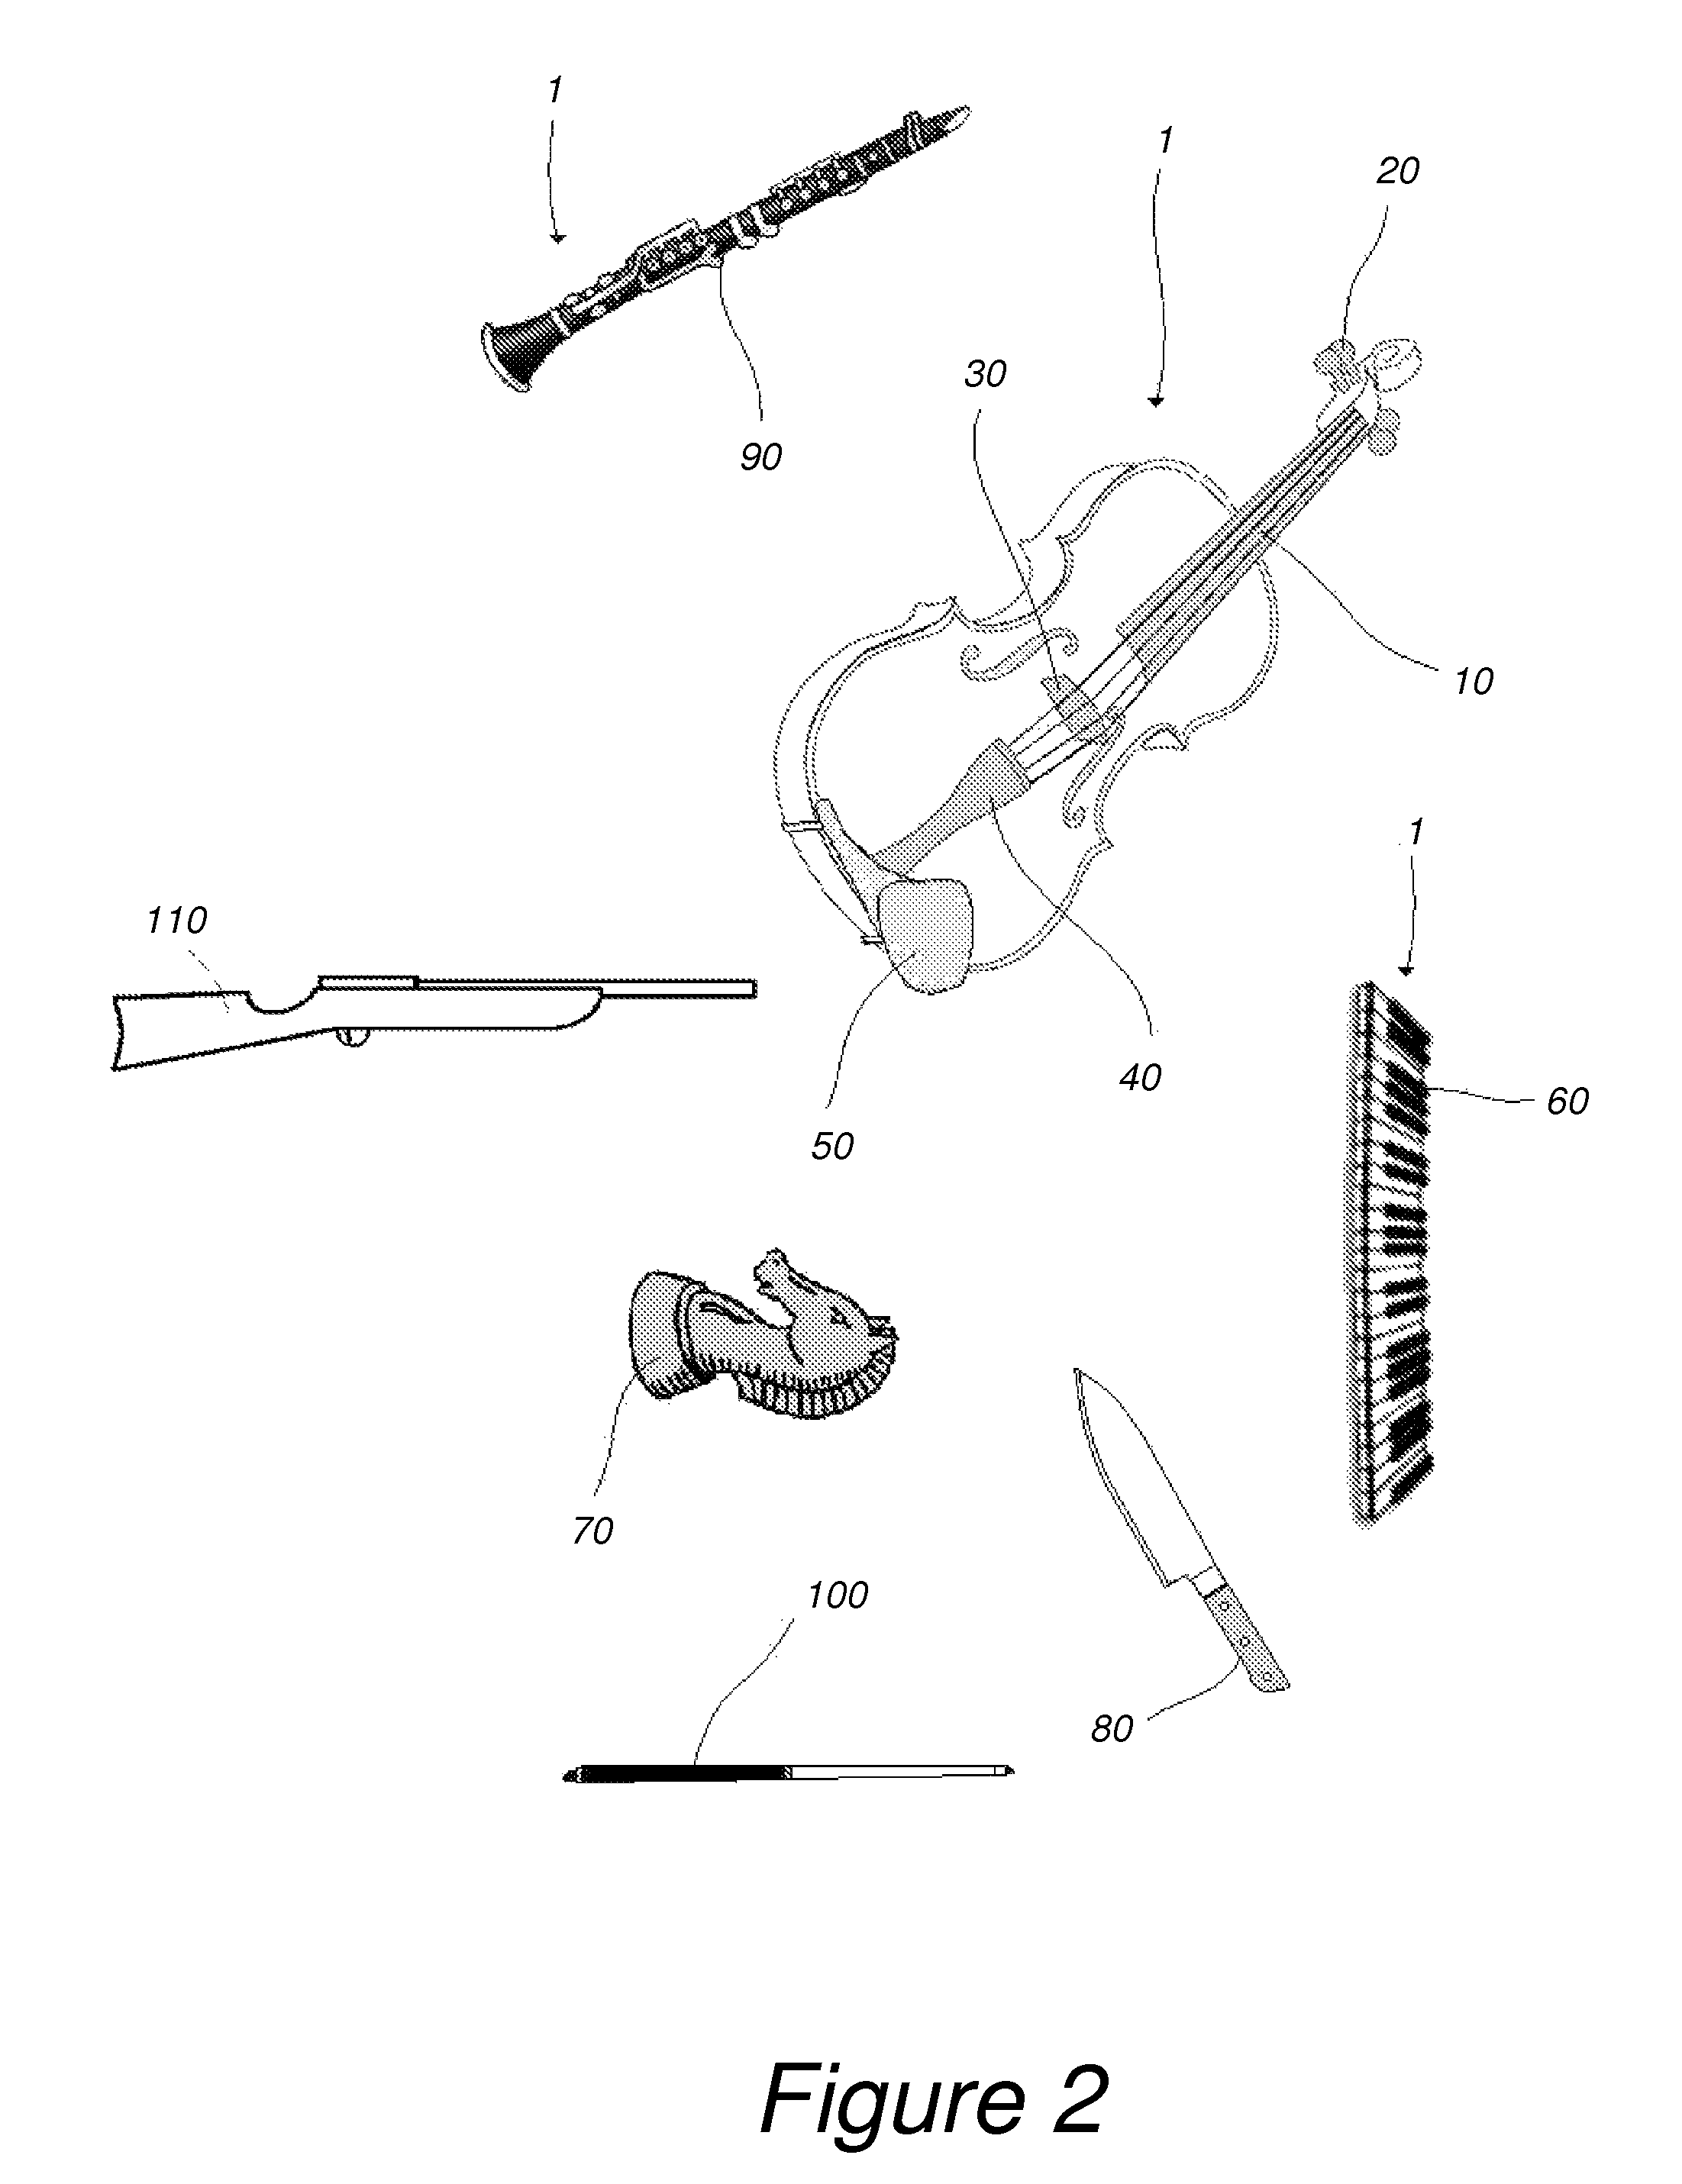 Method of treatment of wooden items